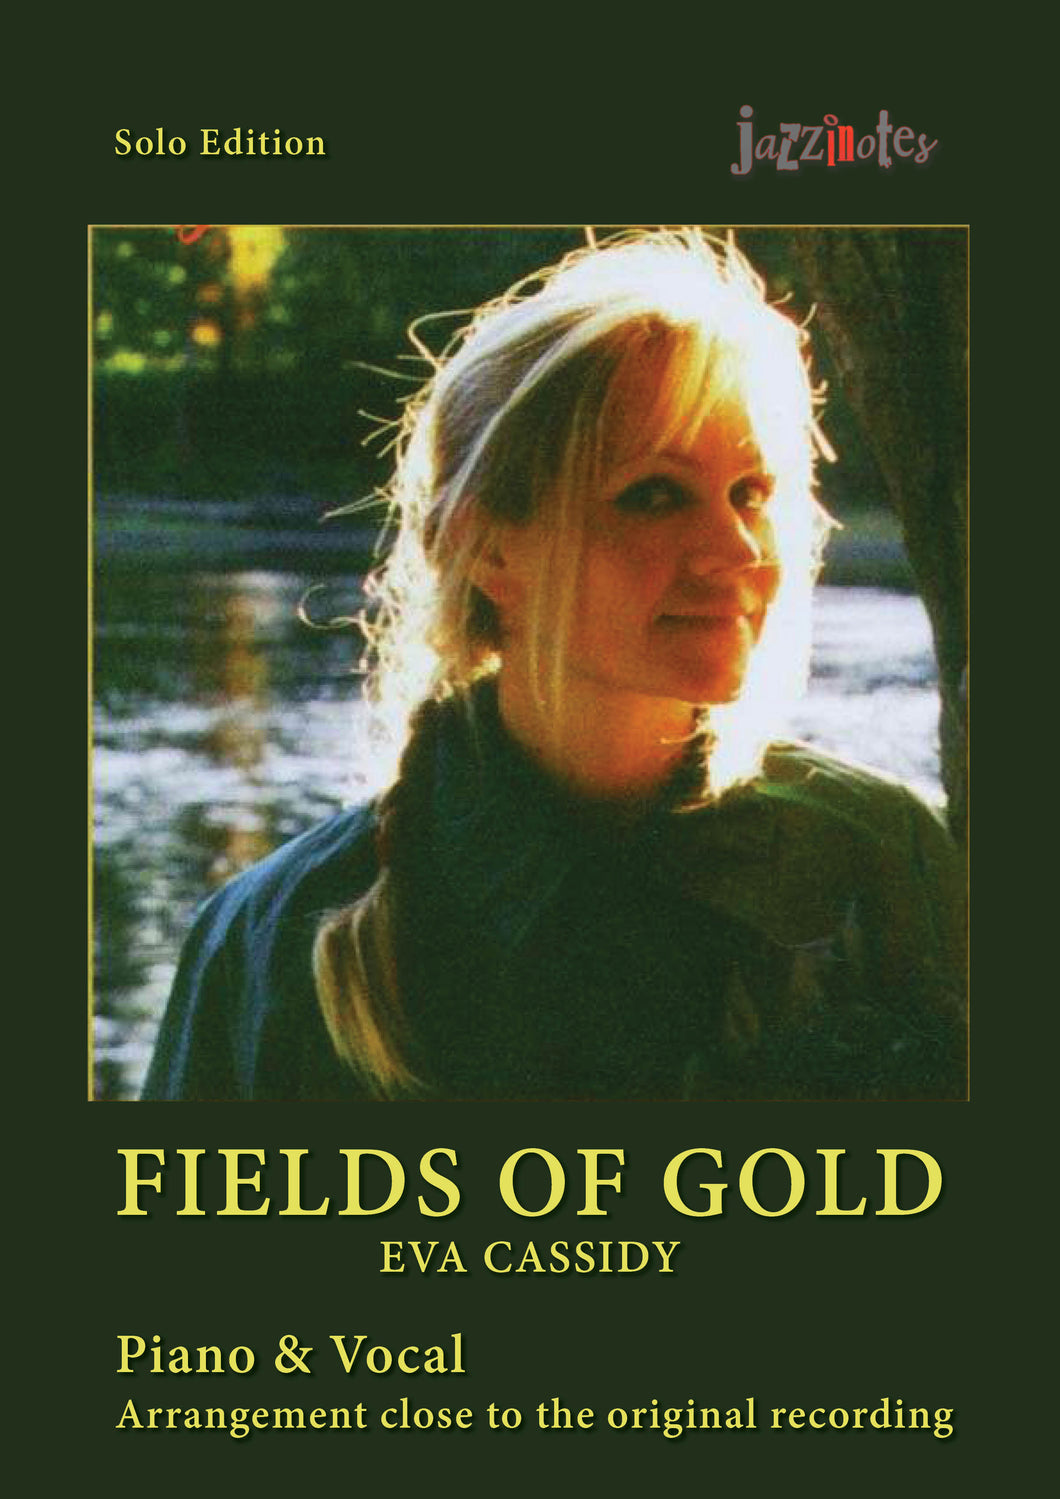 Eva Cassidy: Fields of Gold (Piano Version) - Sheet Music Download